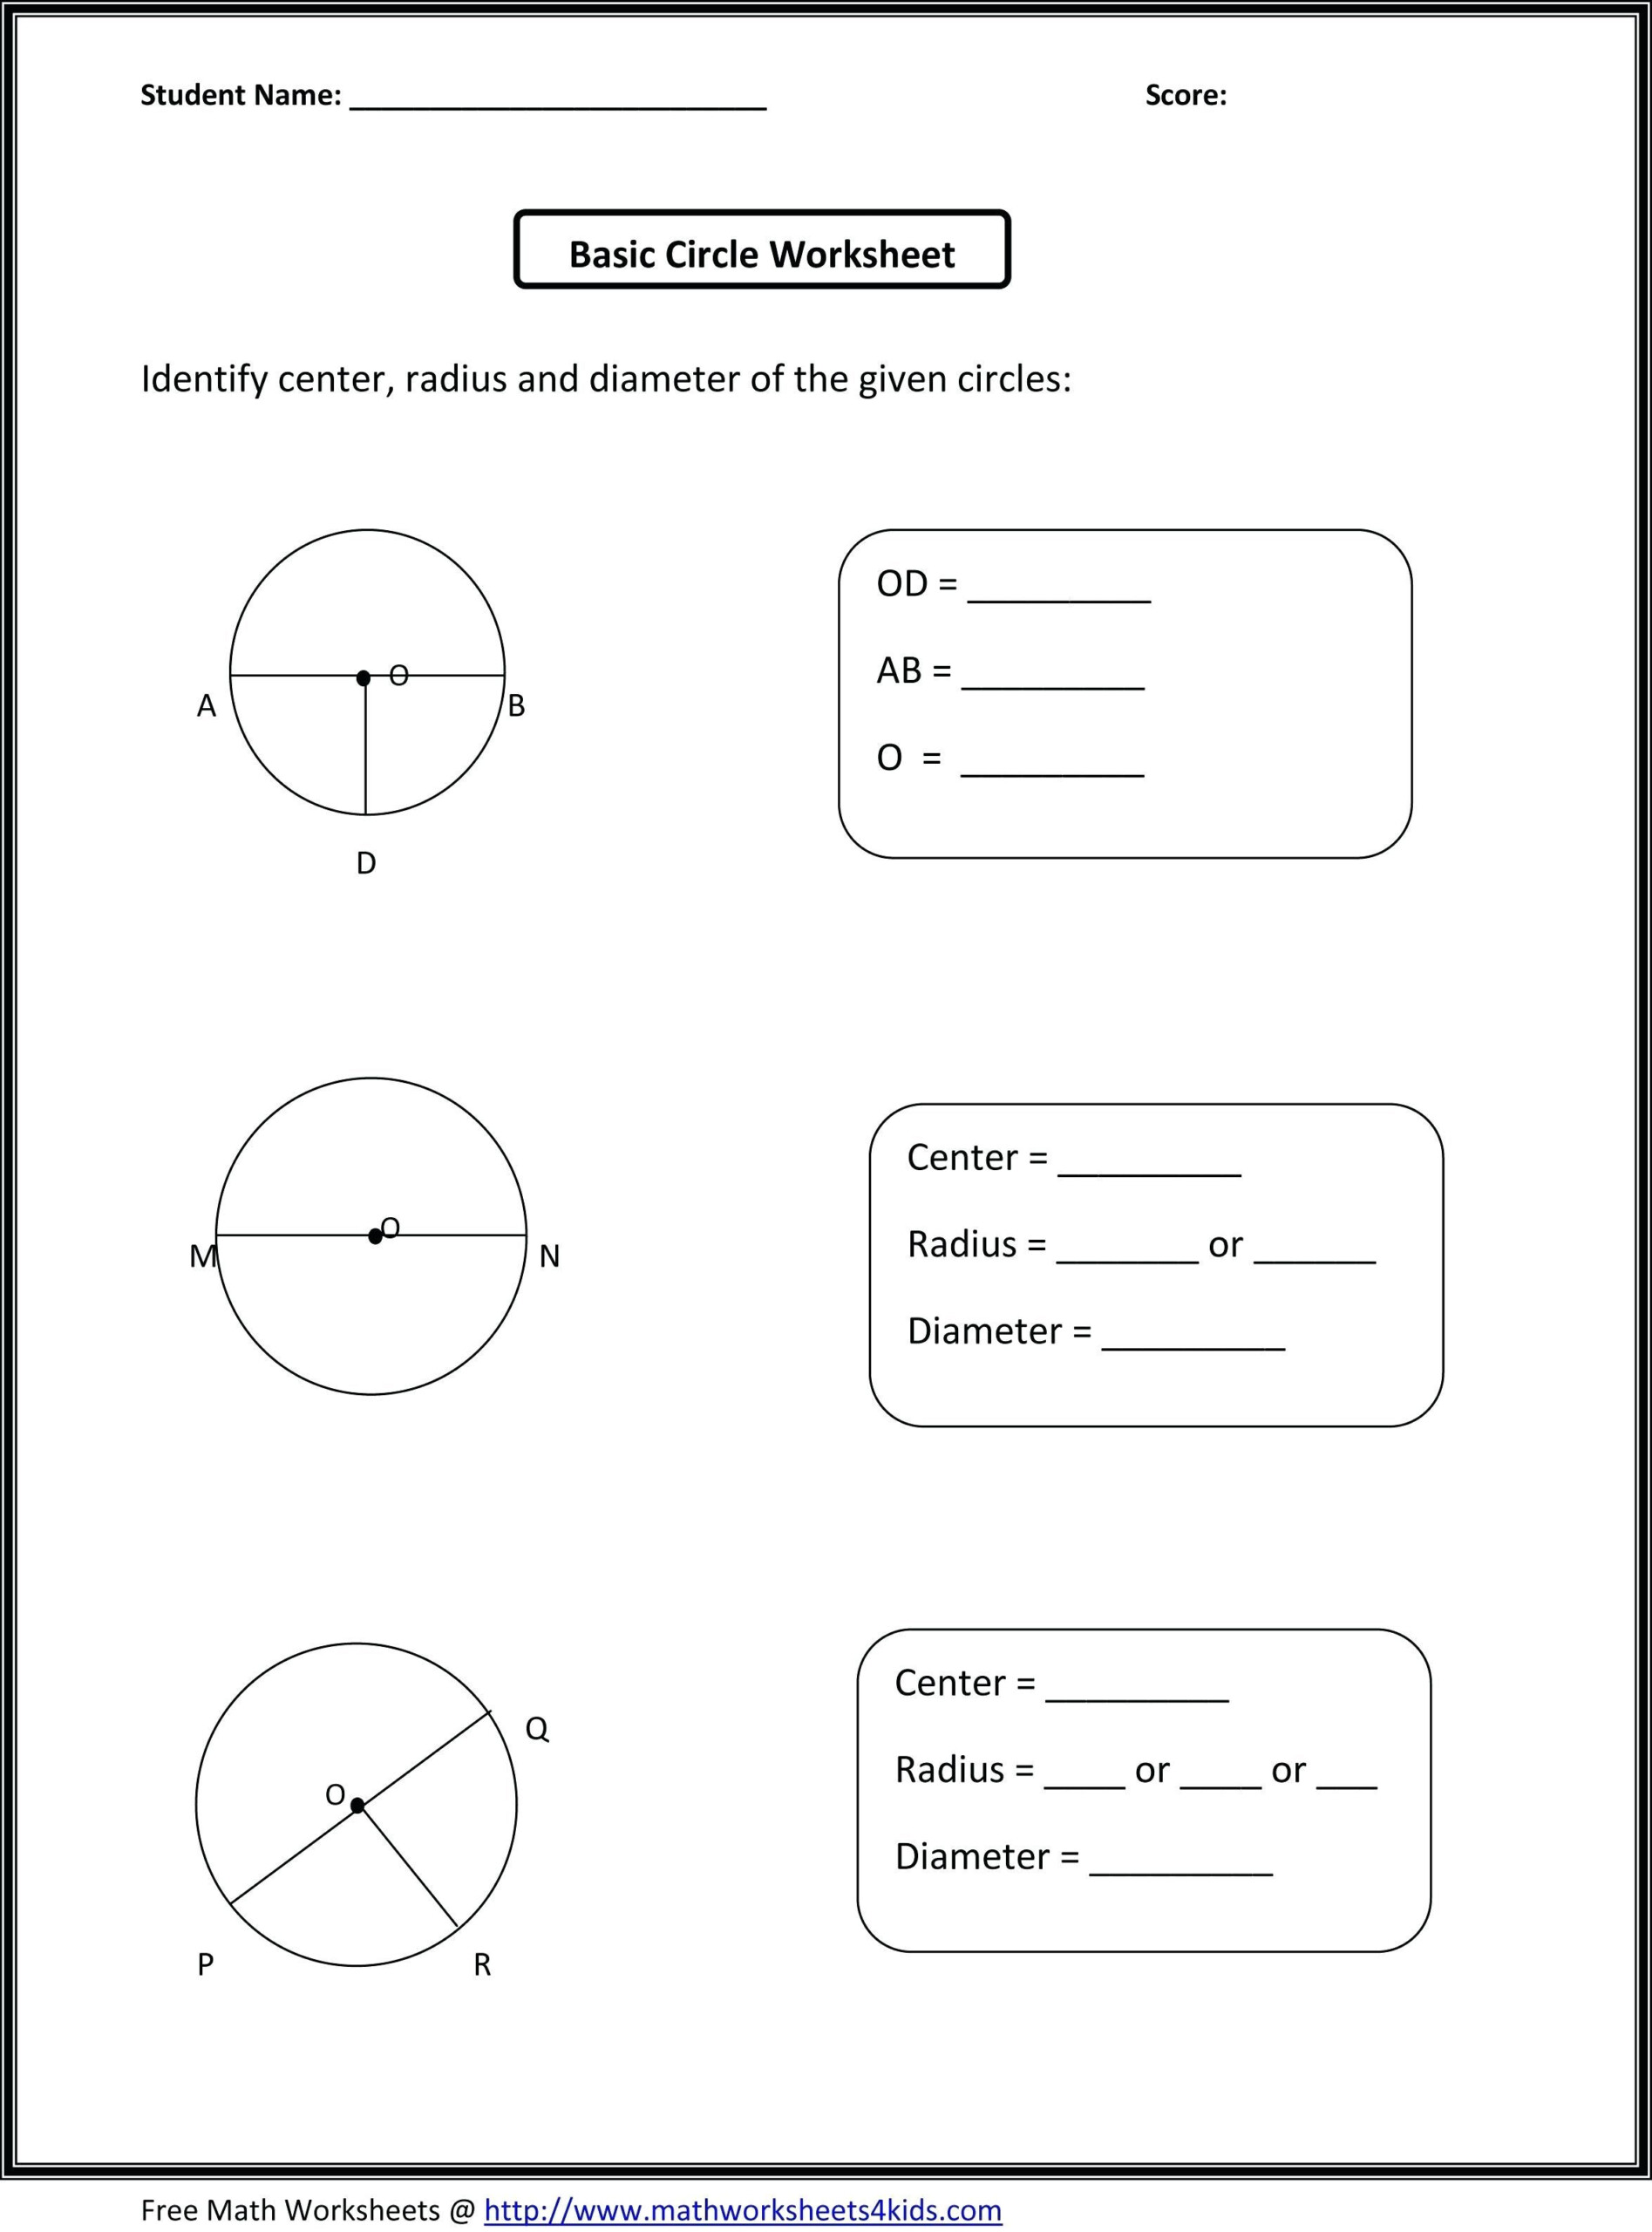 English Comprehension Worksheets For Grade 3 Template Or within Multiplication Worksheets Entry Level 3